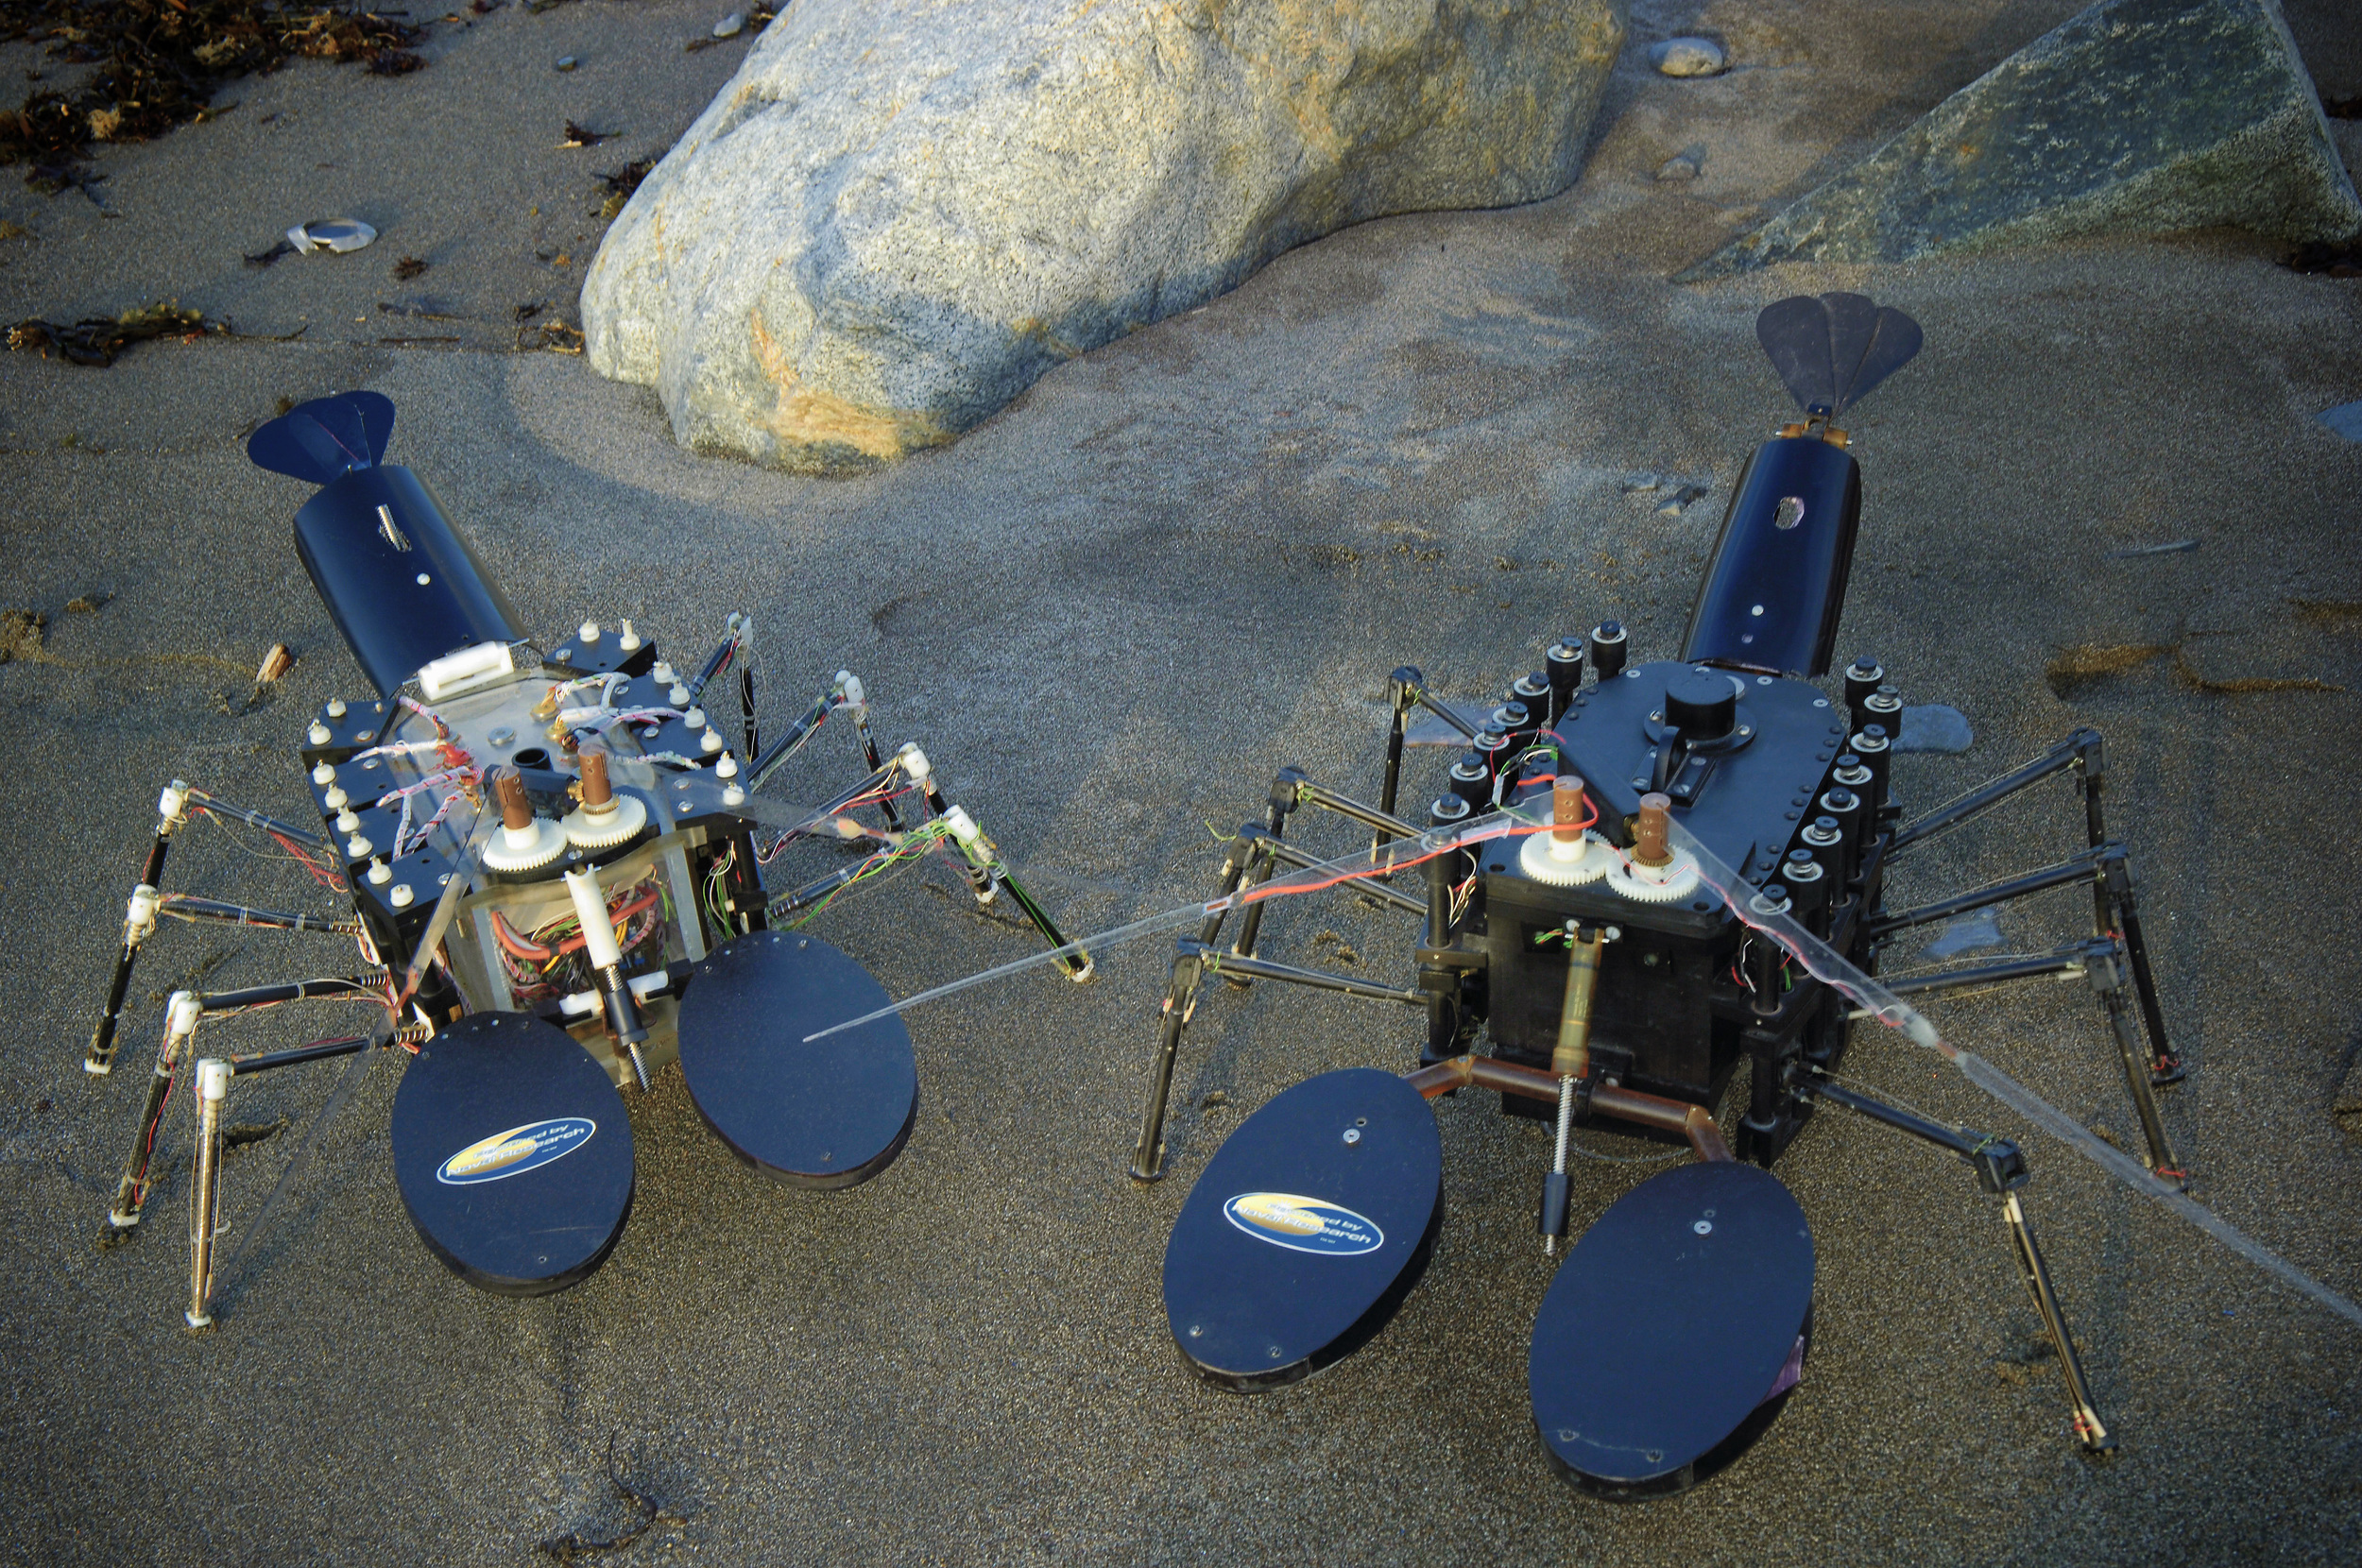   NAHANT, Mass. &nbsp;- The biomimetic underwater robot, Robolobster, at Northeastern University's Marine Science Center. Biomimetic robots take advantage of capabilities proven in animals for dealing with real-world environments. 